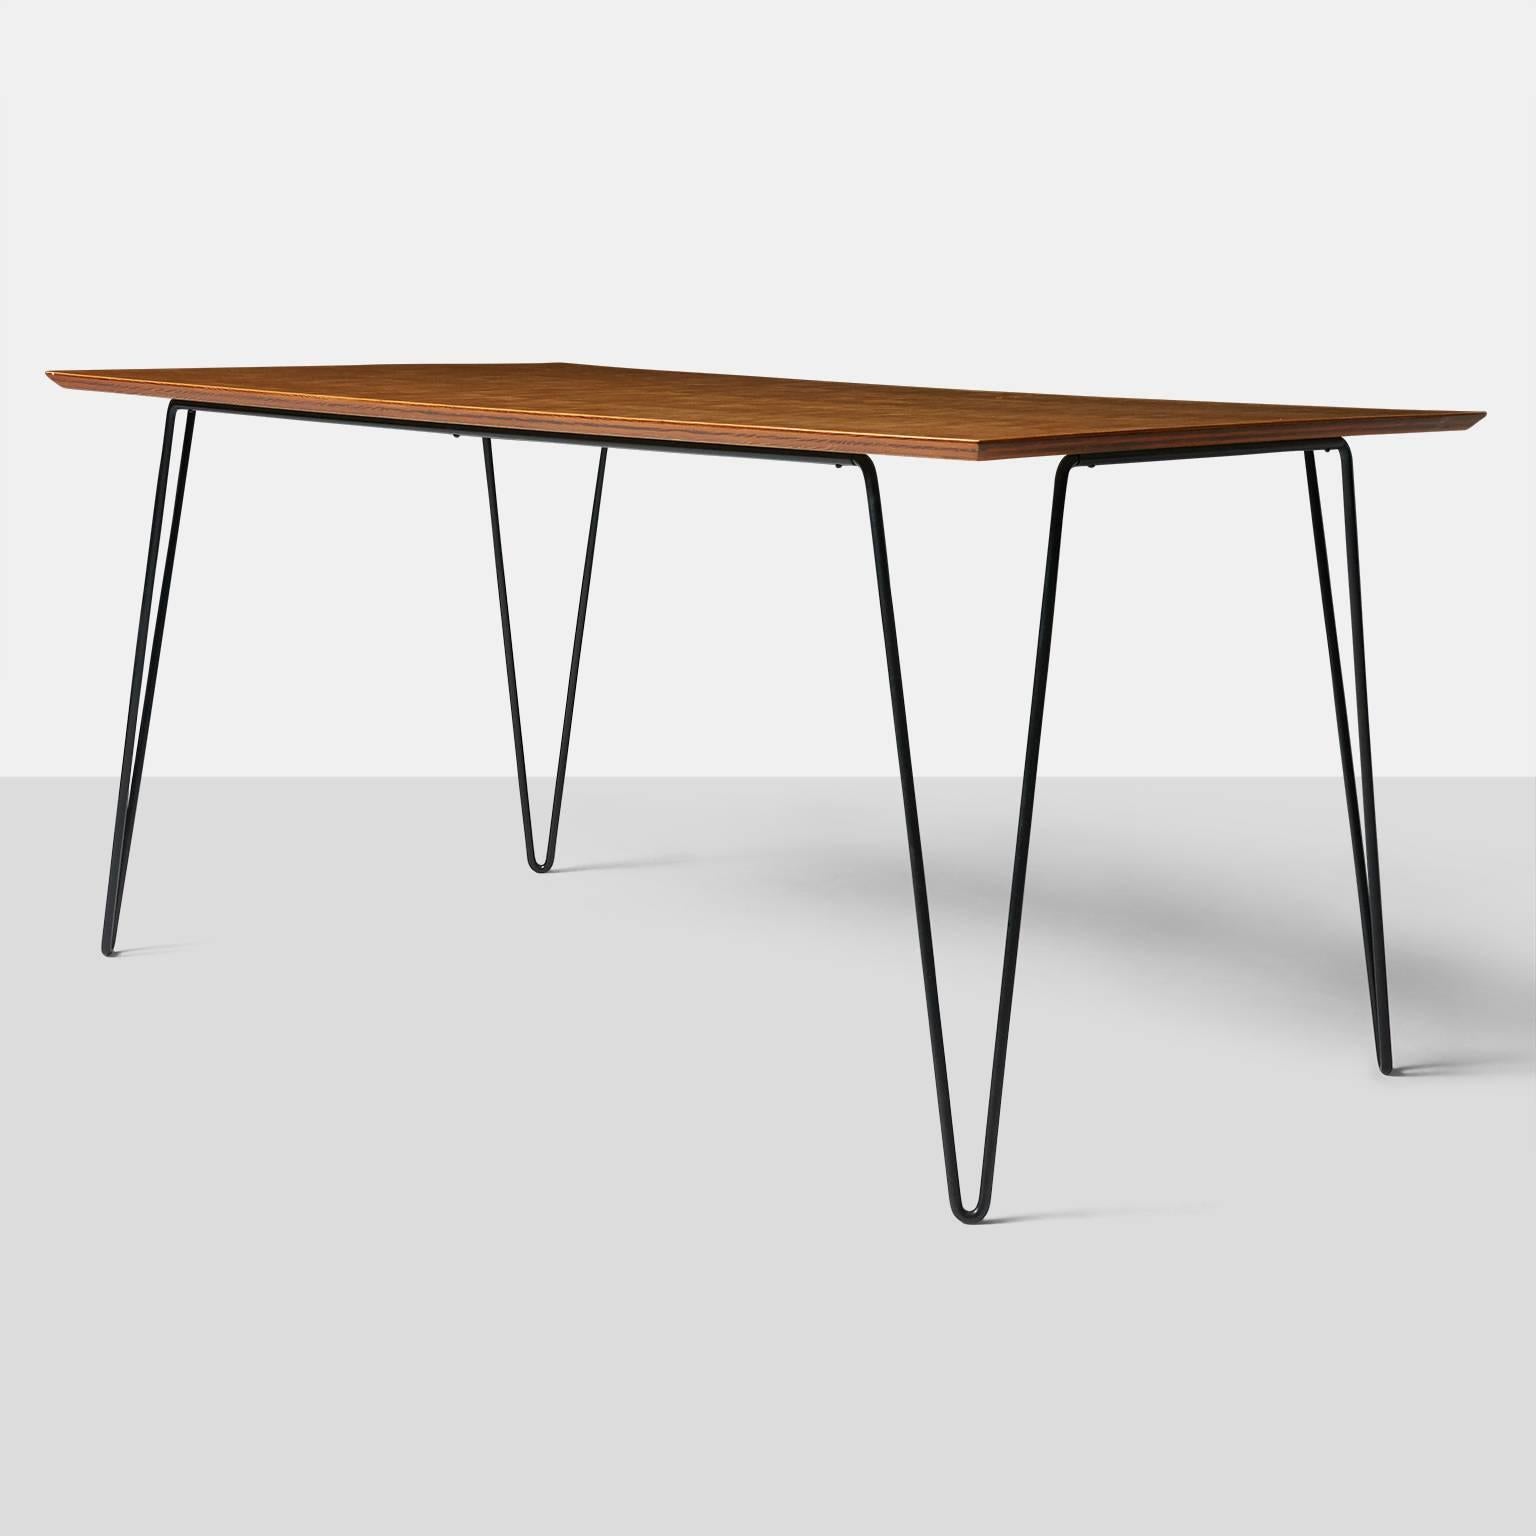 Dining table by Dorothy Schindele.
A rectangular dining table with a pale walnut top, eased edge, and resting on black enameled hair pin legs.
USA, circa 1950s.